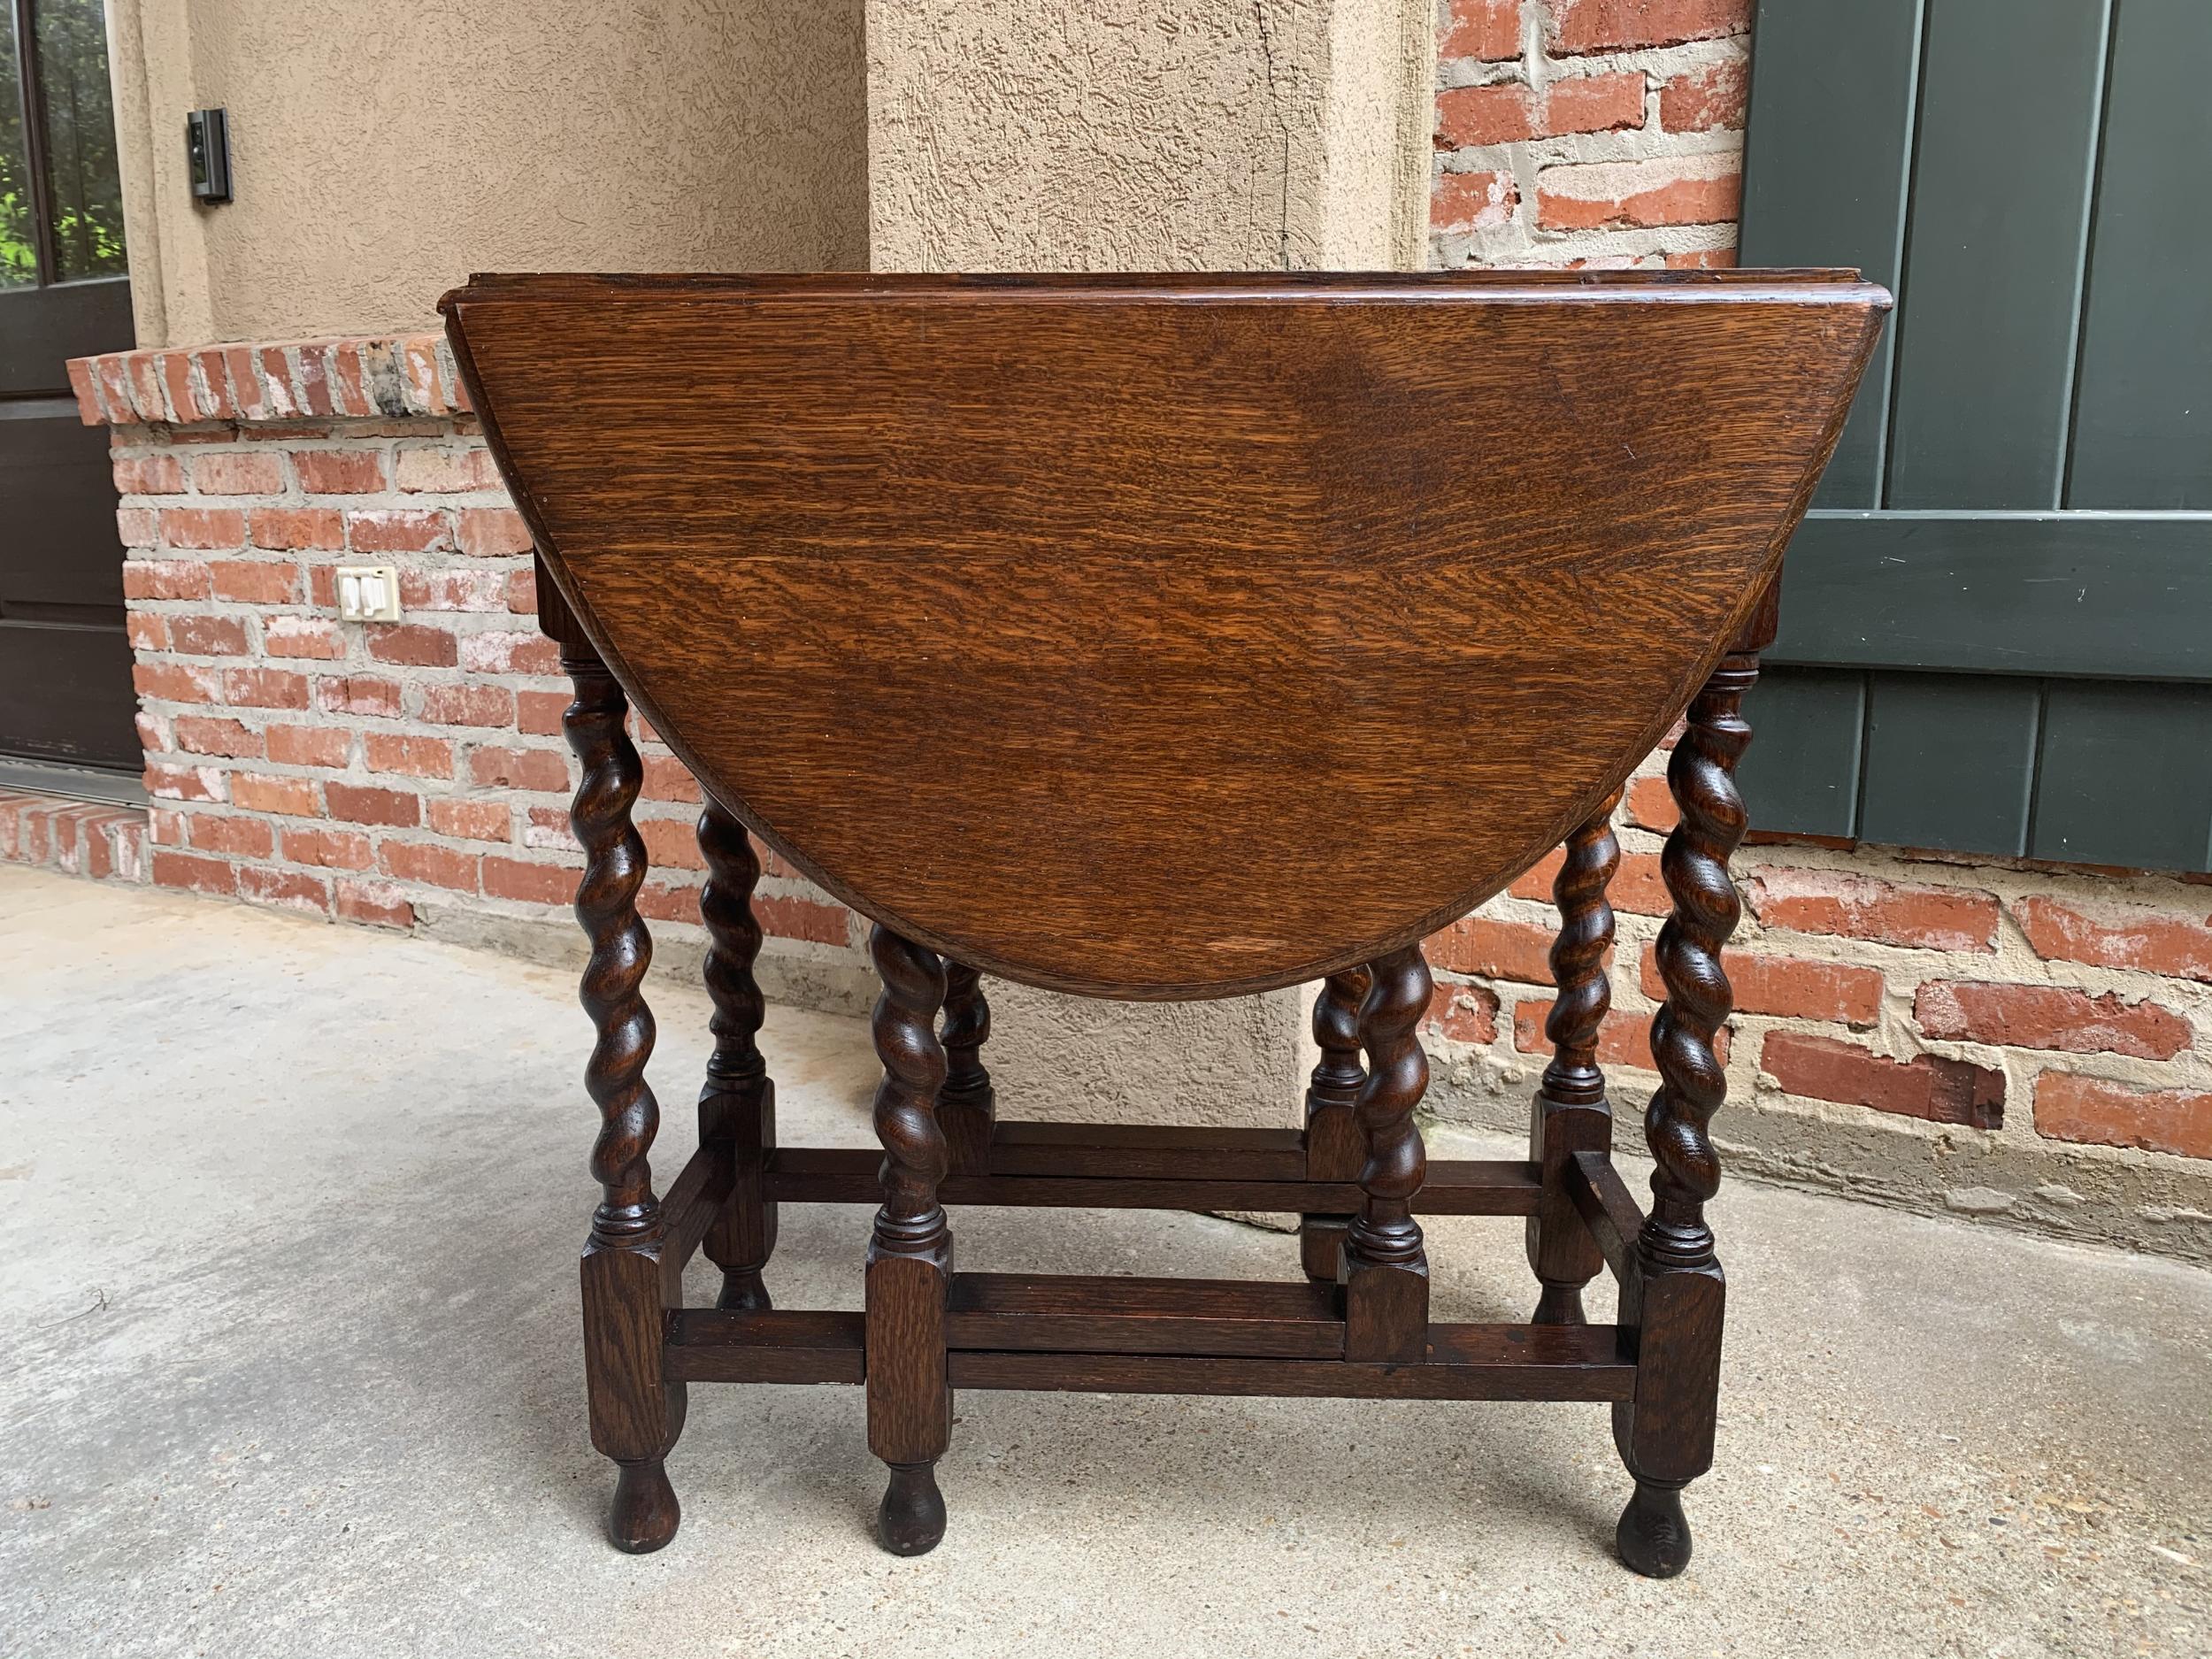 ~Direct from England~
~A beautiful antique English oak gate leg, drop leaf table with British barley twist legs on the table and gate legs~
~It is a versatile small size, perfect for a side or sofa table, also wonderful as a bedside table or a